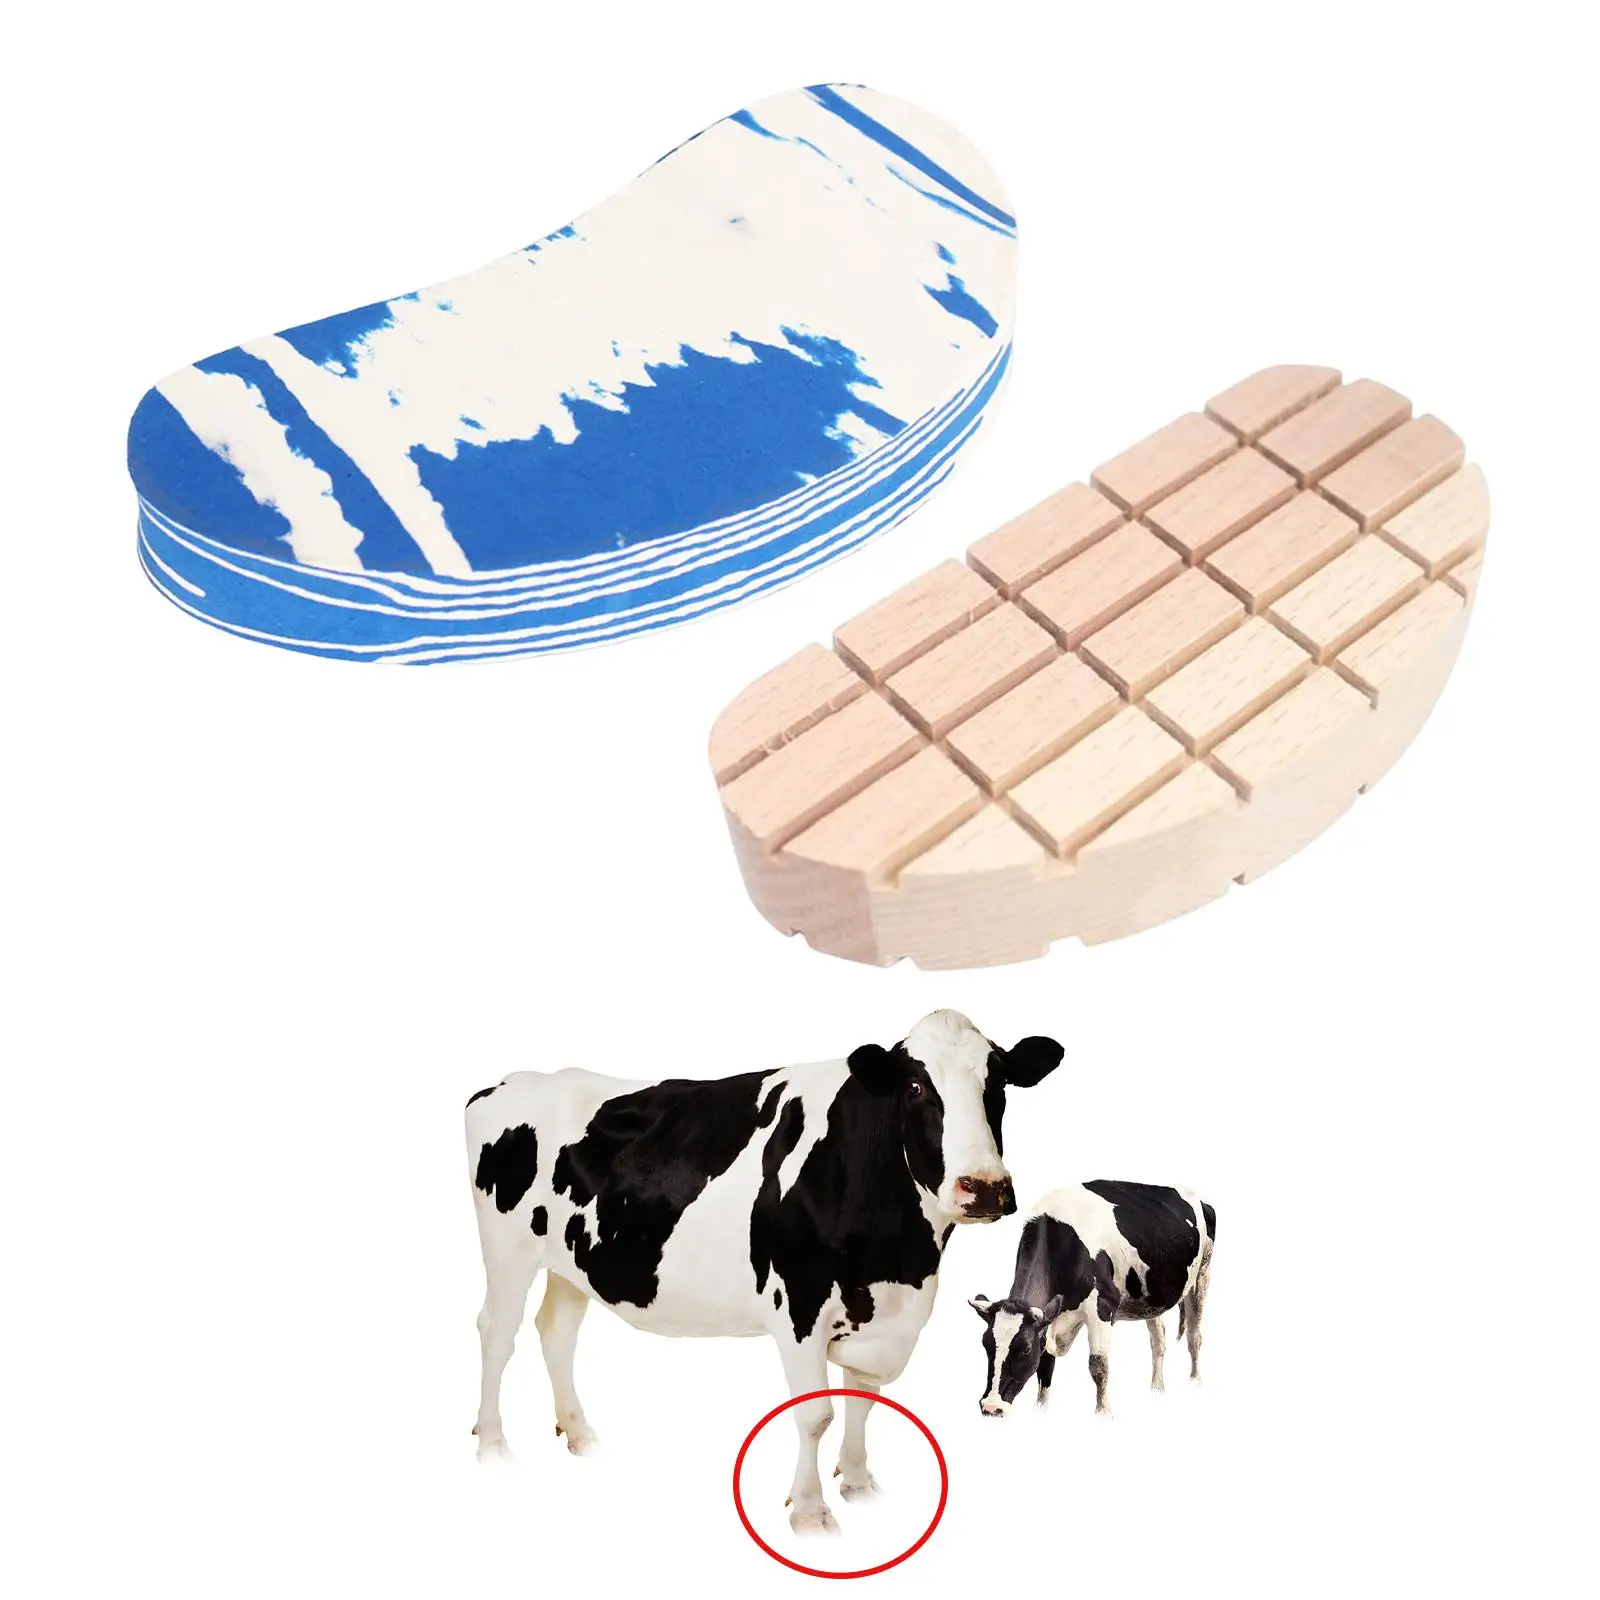 Cow Trimming Cushion Wooden Competition Protection Manicure Care Accessories Wearproof Cow Hoof Pad for Goats Sheep Livestock